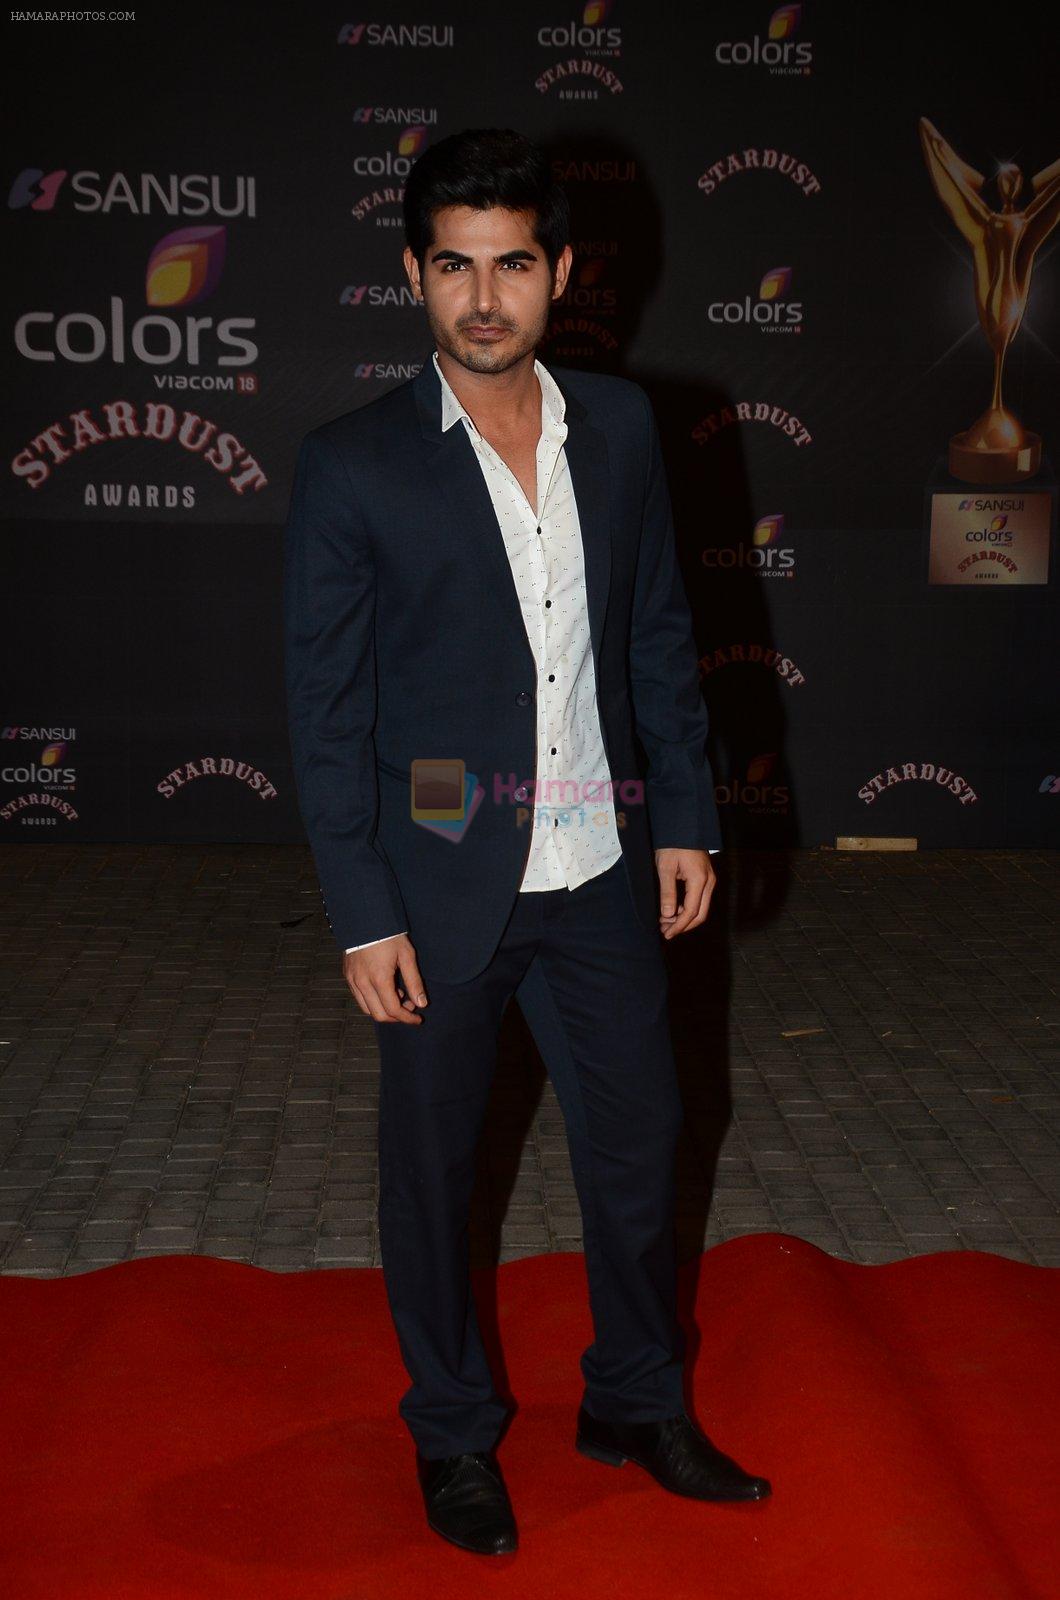 at the red carpet of Stardust awards on 21st Dec 2015